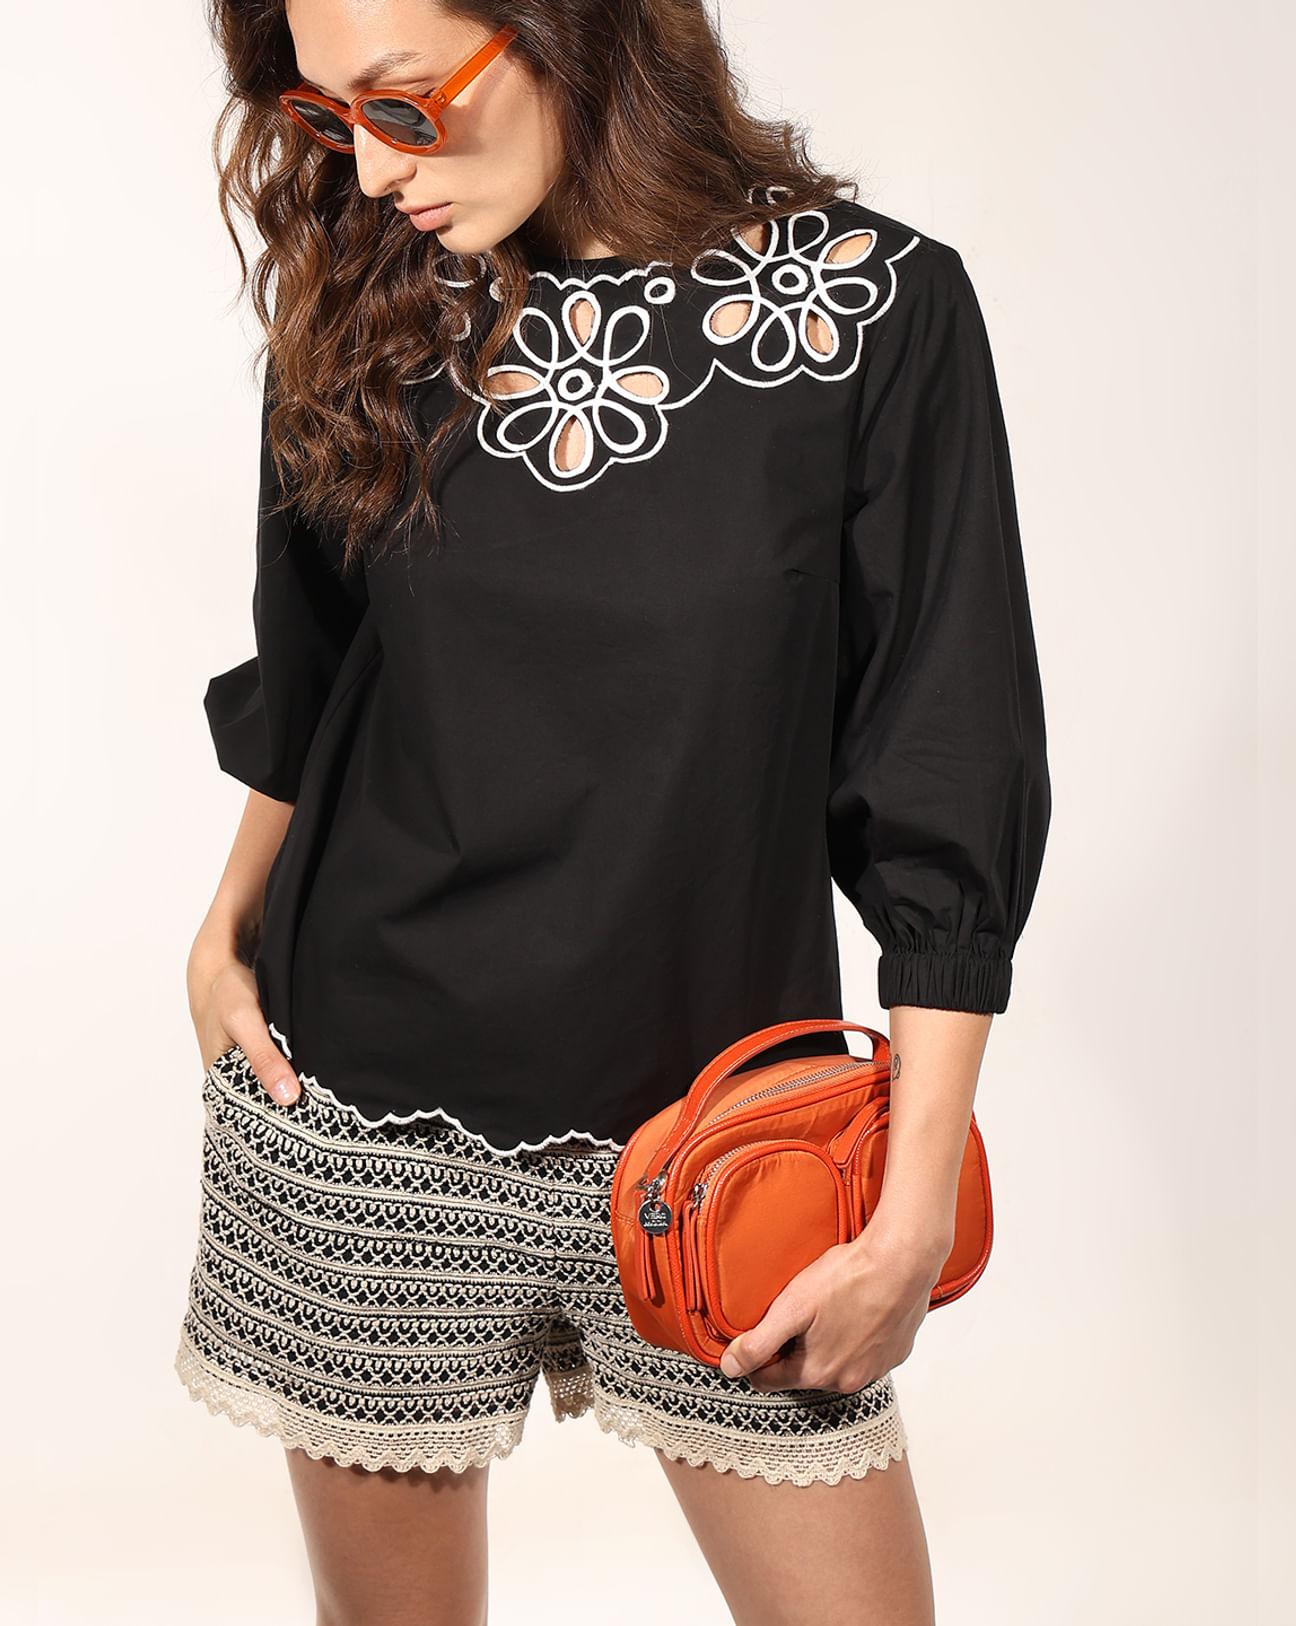 black-floral-embroidered-top